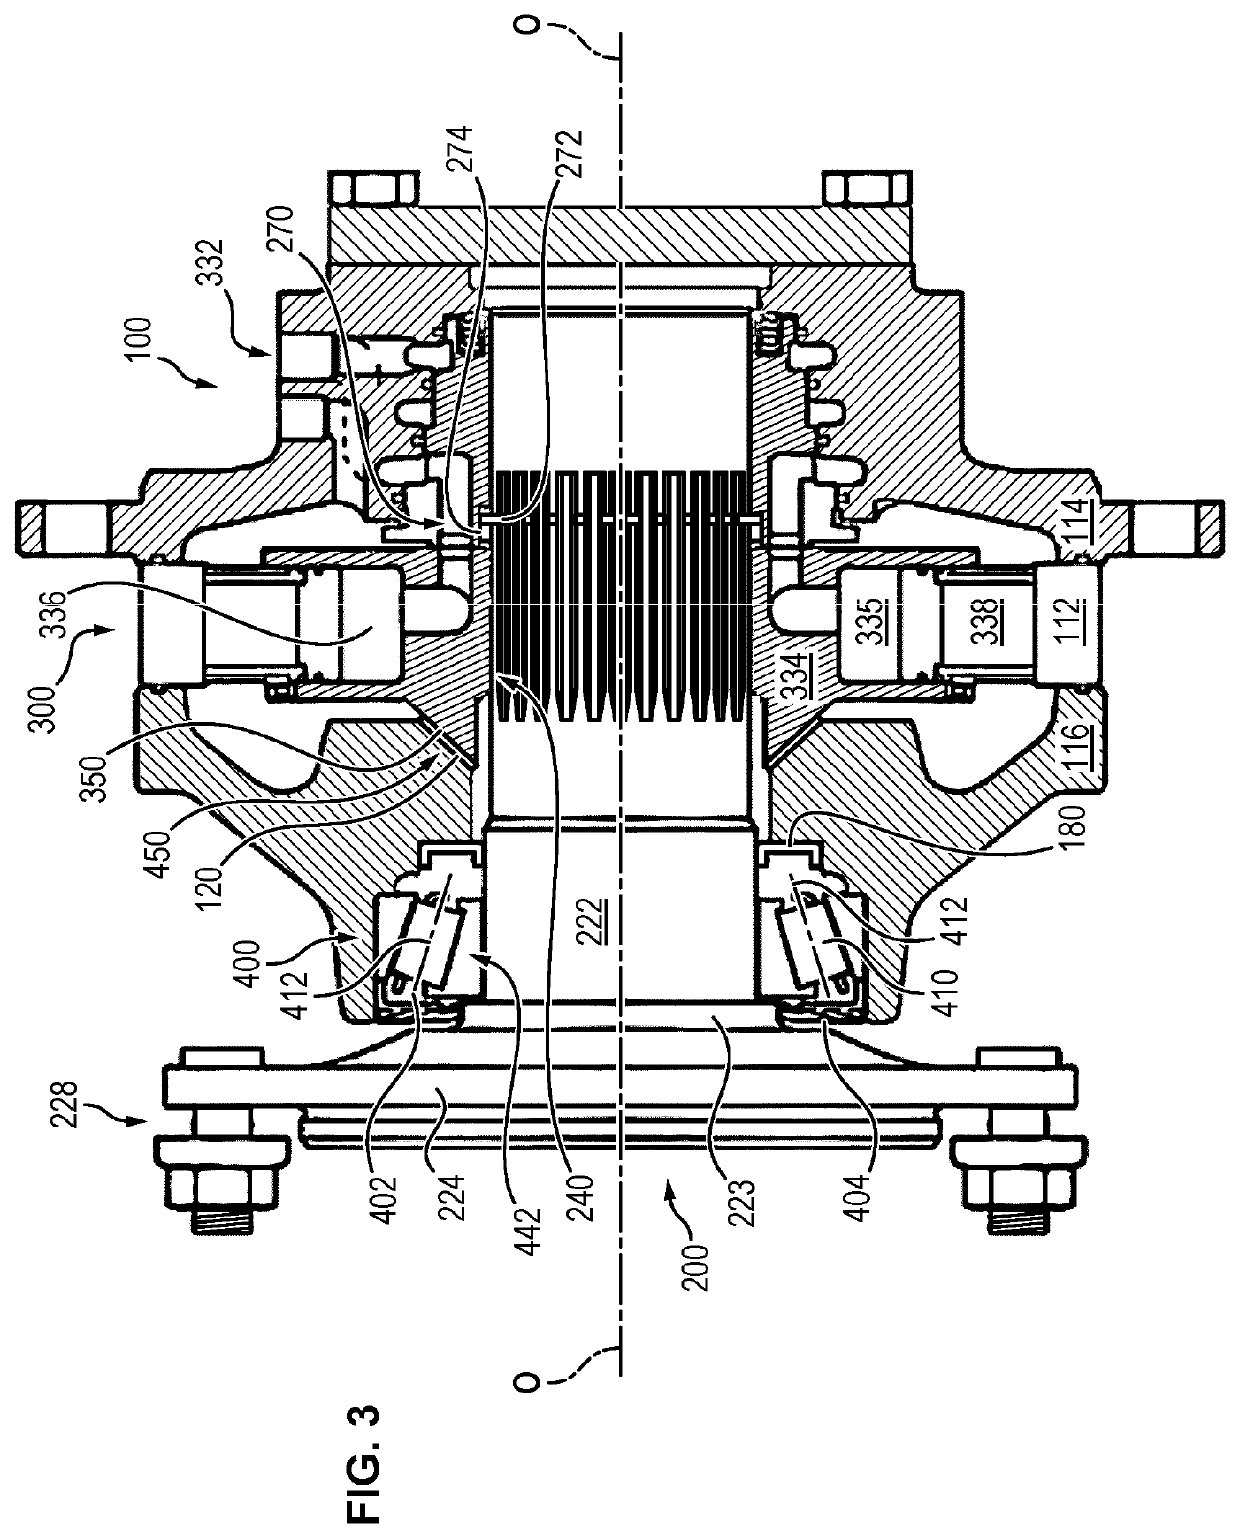 Hydraulic machine comprising an improved bearing